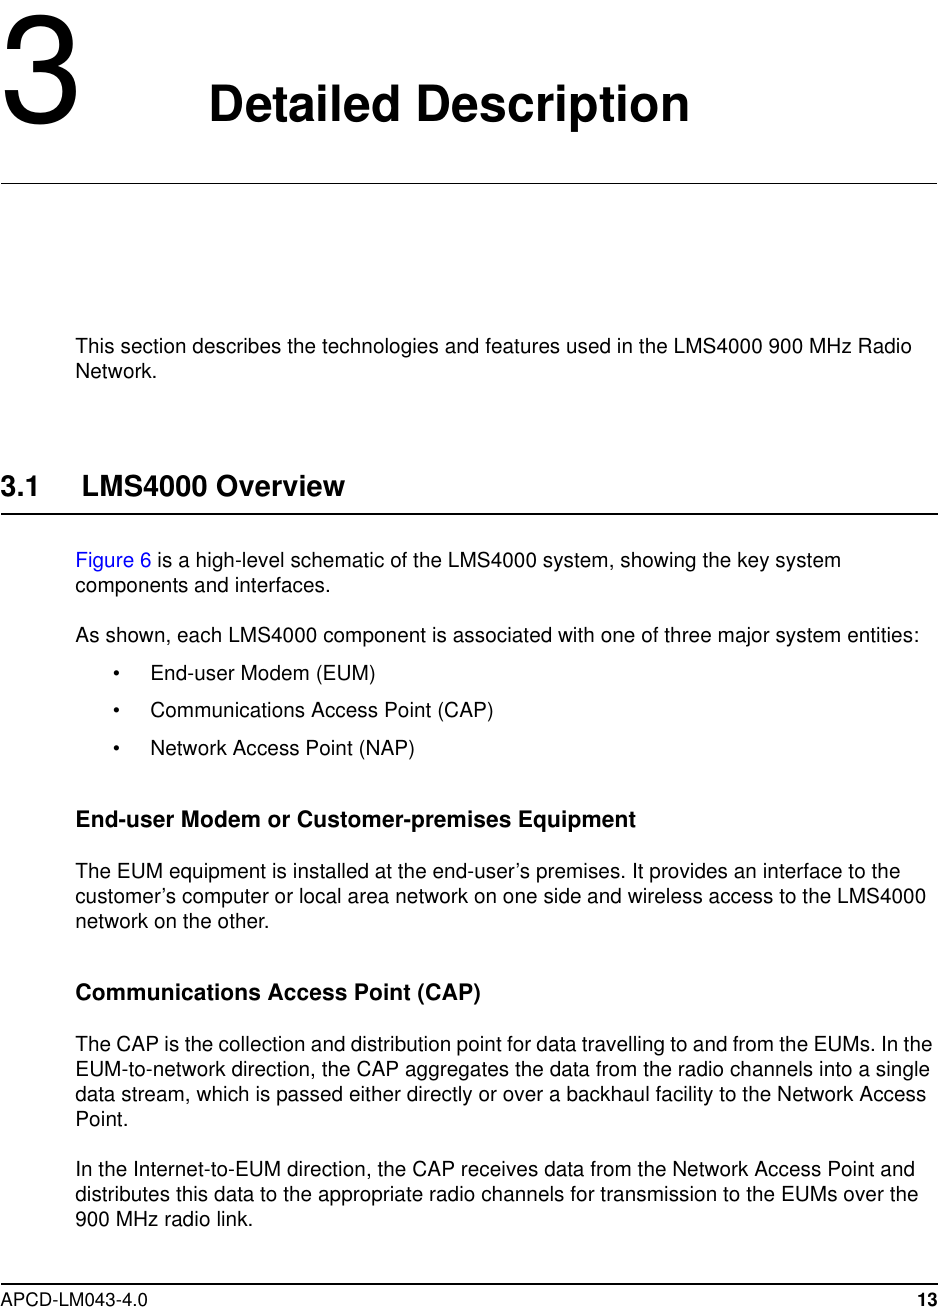 APCD-LM043-4.0 133Detailed DescriptionThis section describes the technologies and features used in the LMS4000 900 MHz RadioNetwork.3.1 LMS4000 OverviewFigure 6 is a high-level schematic of the LMS4000 system, showing the key systemcomponents and interfaces.As shown, each LMS4000 component is associated with one of three major system entities:• End-user Modem (EUM)• Communications Access Point (CAP)• Network Access Point (NAP)End-user Modem or Customer-premises EquipmentThe EUM equipment is installed at the end-user’s premises. It provides an interface to thecustomer’s computer or local area network on one side and wireless access to the LMS4000network on the other.Communications Access Point (CAP)The CAP is the collection and distribution point for data travelling to and from the EUMs. In theEUM-to-network direction, the CAP aggregates the data from the radio channels into a singledata stream, which is passed either directly or over a backhaul facility to the Network AccessPoint.In the Internet-to-EUM direction, the CAP receives data from the Network Access Point anddistributes this data to the appropriate radio channels for transmission to the EUMs over the900 MHz radio link.